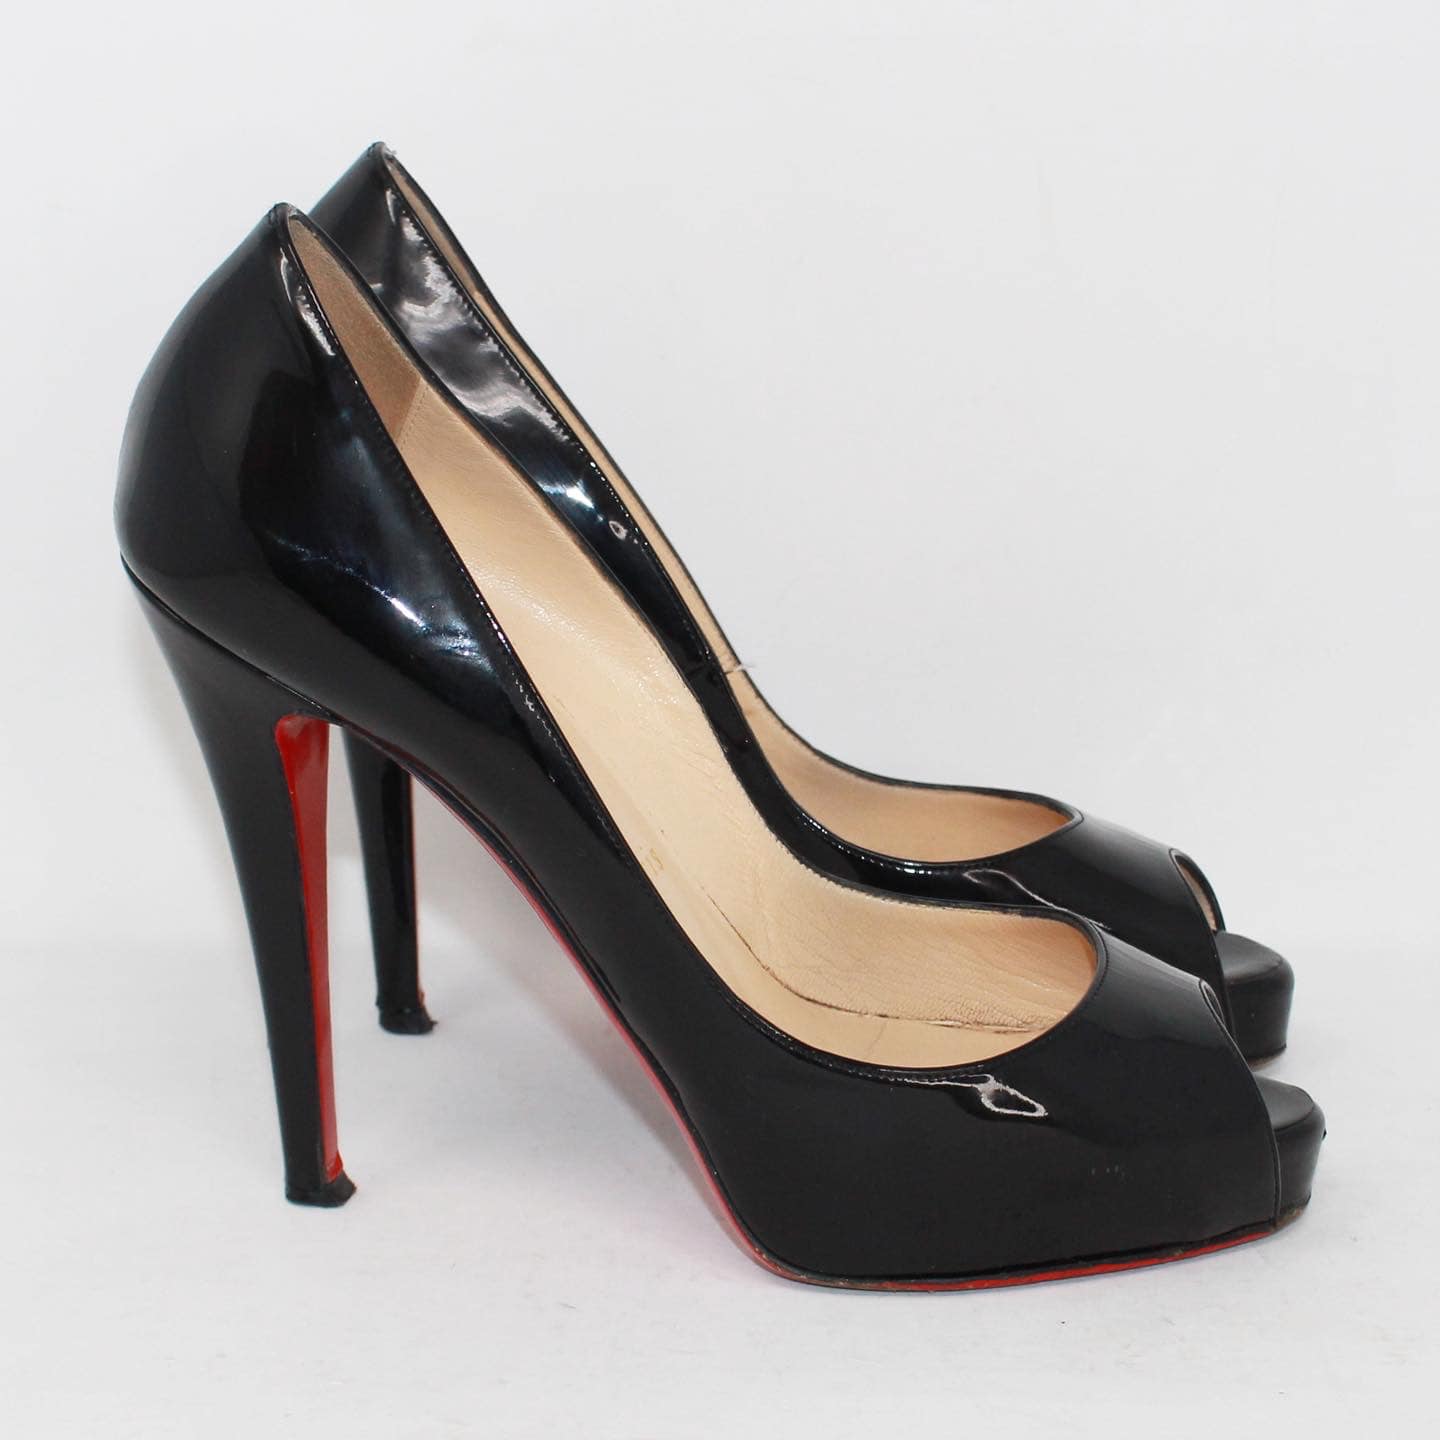 Christian Louboutin Pre-owned Women's Leather Wedges - Black - EU 37